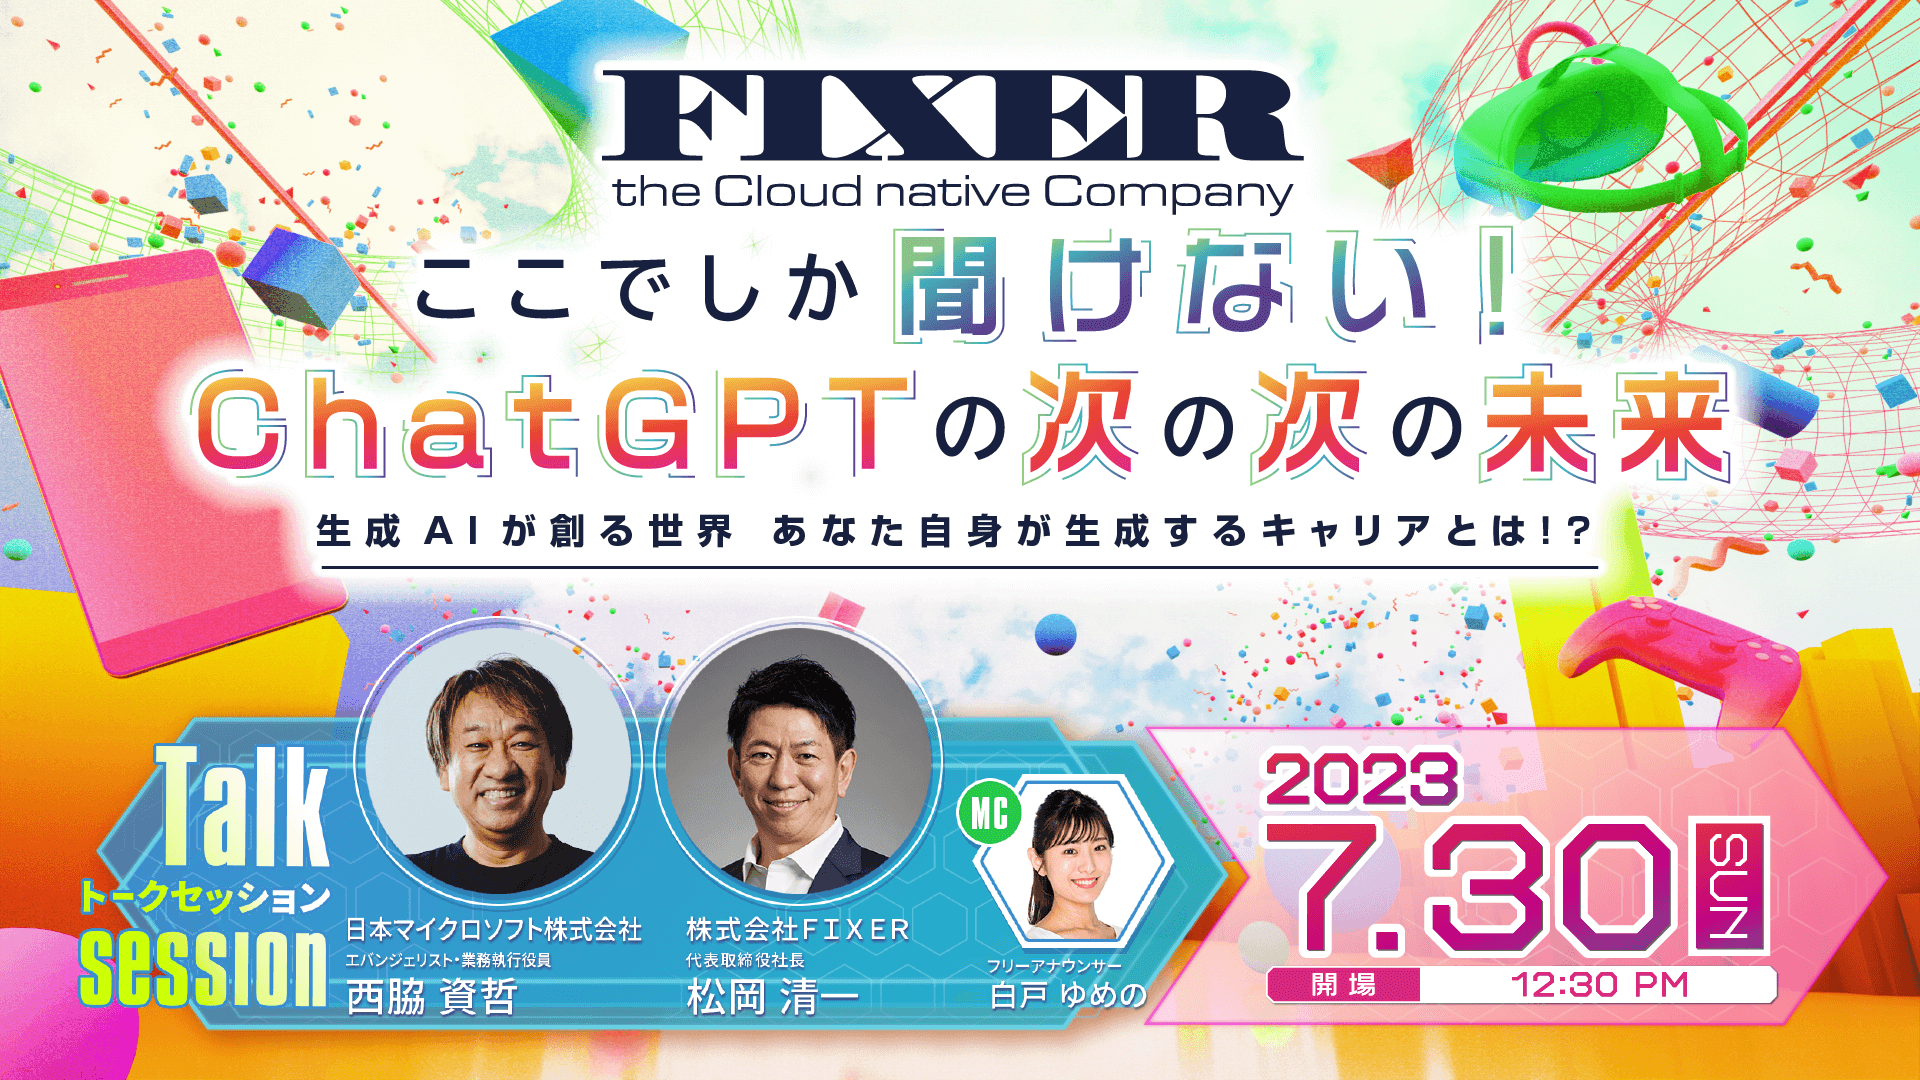 2023_0728_001_fixer_career_event_chatgpt_ai_001.png